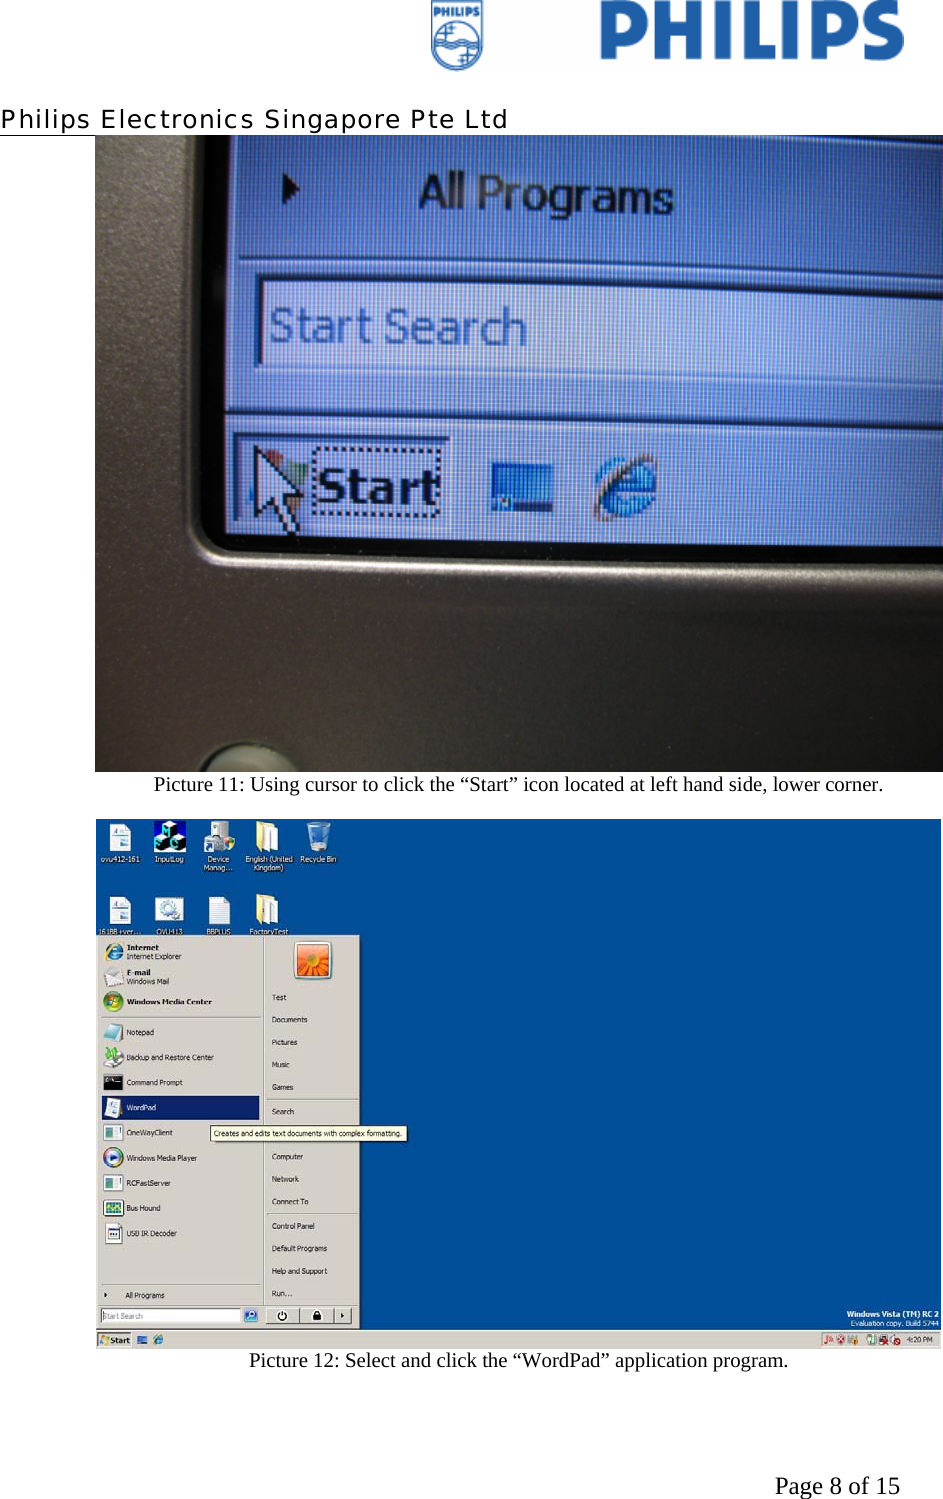    Philips Electronics Singapore Pte Ltd  Page 8 of 15 Picture 11: Using cursor to click the “Start” icon located at left hand side, lower corner.   Picture 12: Select and click the “WordPad” application program.  